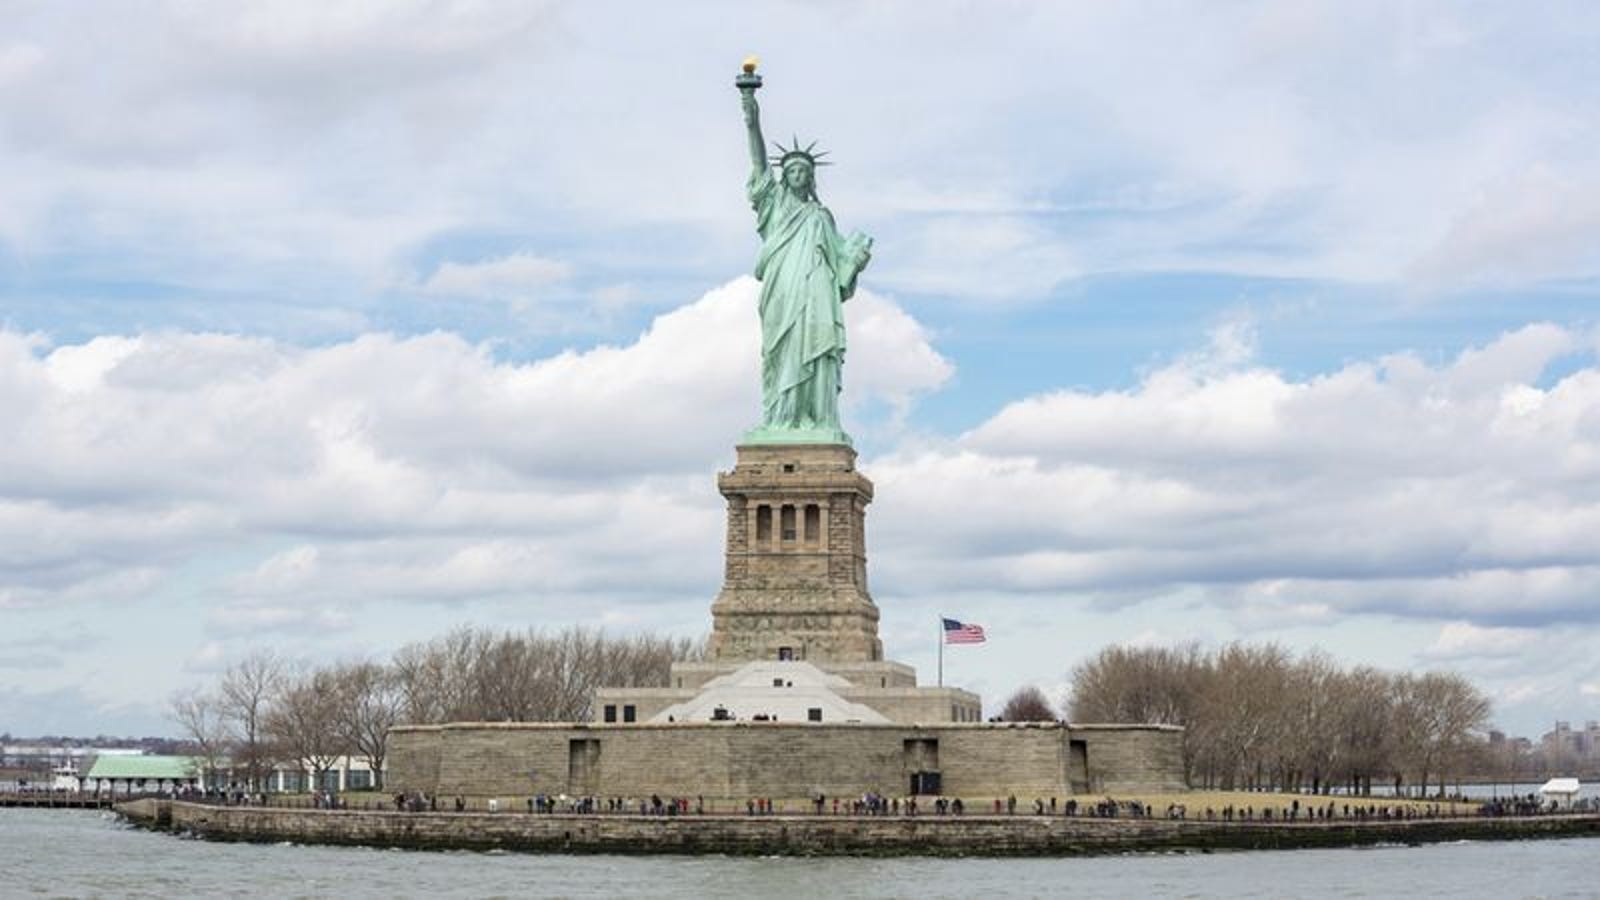 Download Death Is Just A Natural Part Of This Statue Of Liberty Tour